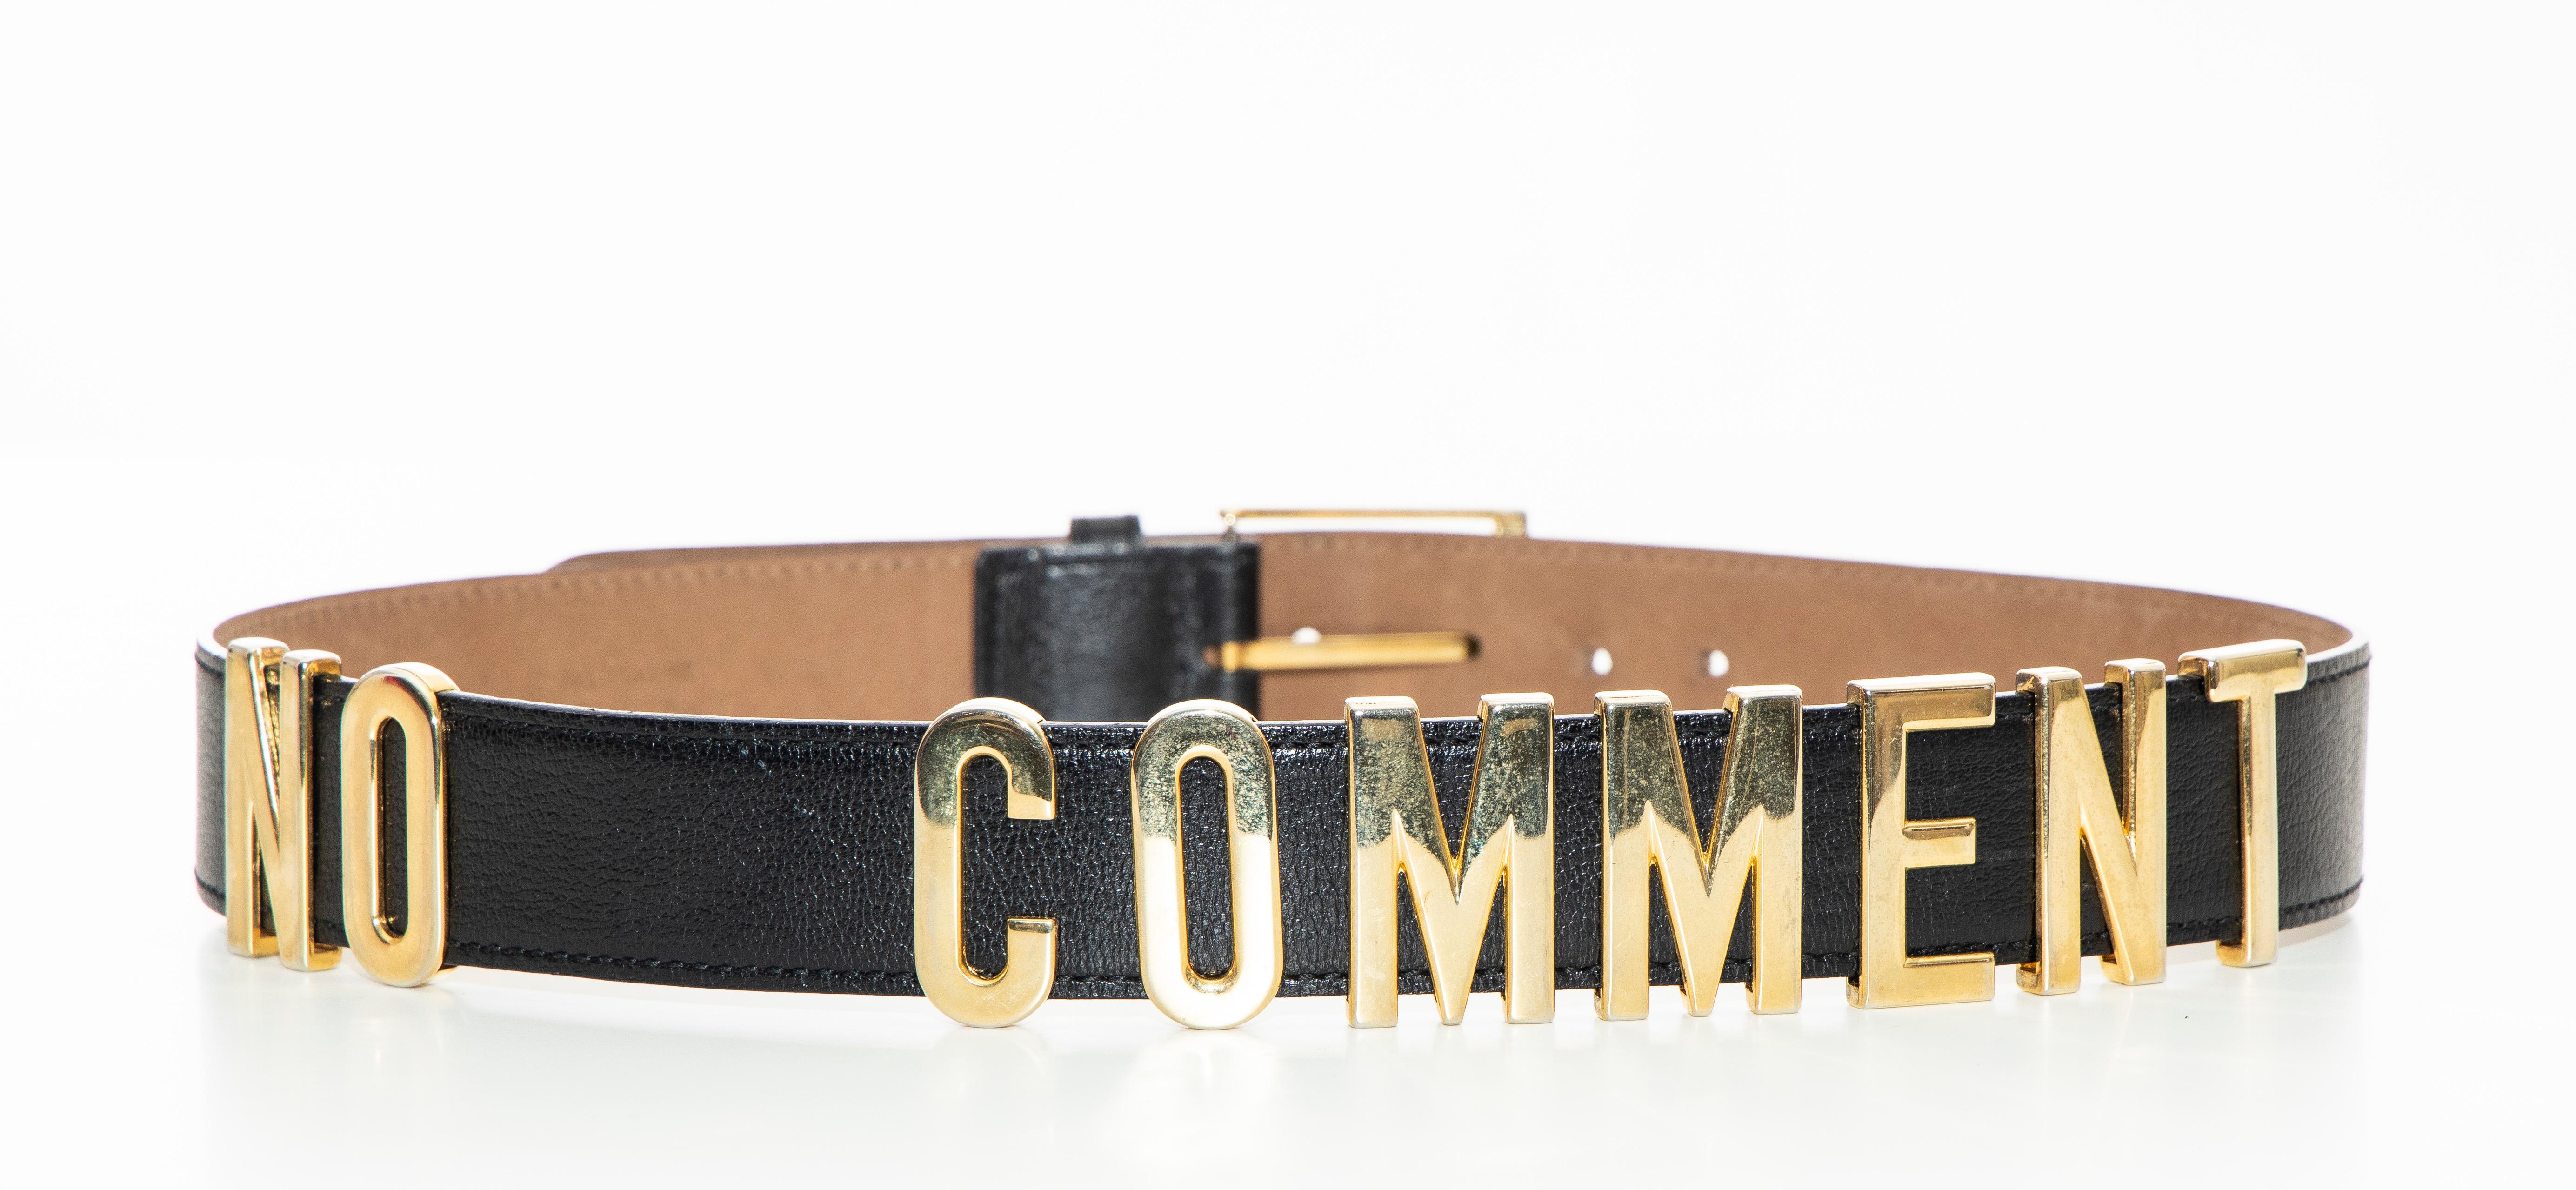 Moschino, Circa: 1990's black redwall leather belt with gold-tone hardware, 'No Comment' at exterior and buckle closure.

Length Min: 27